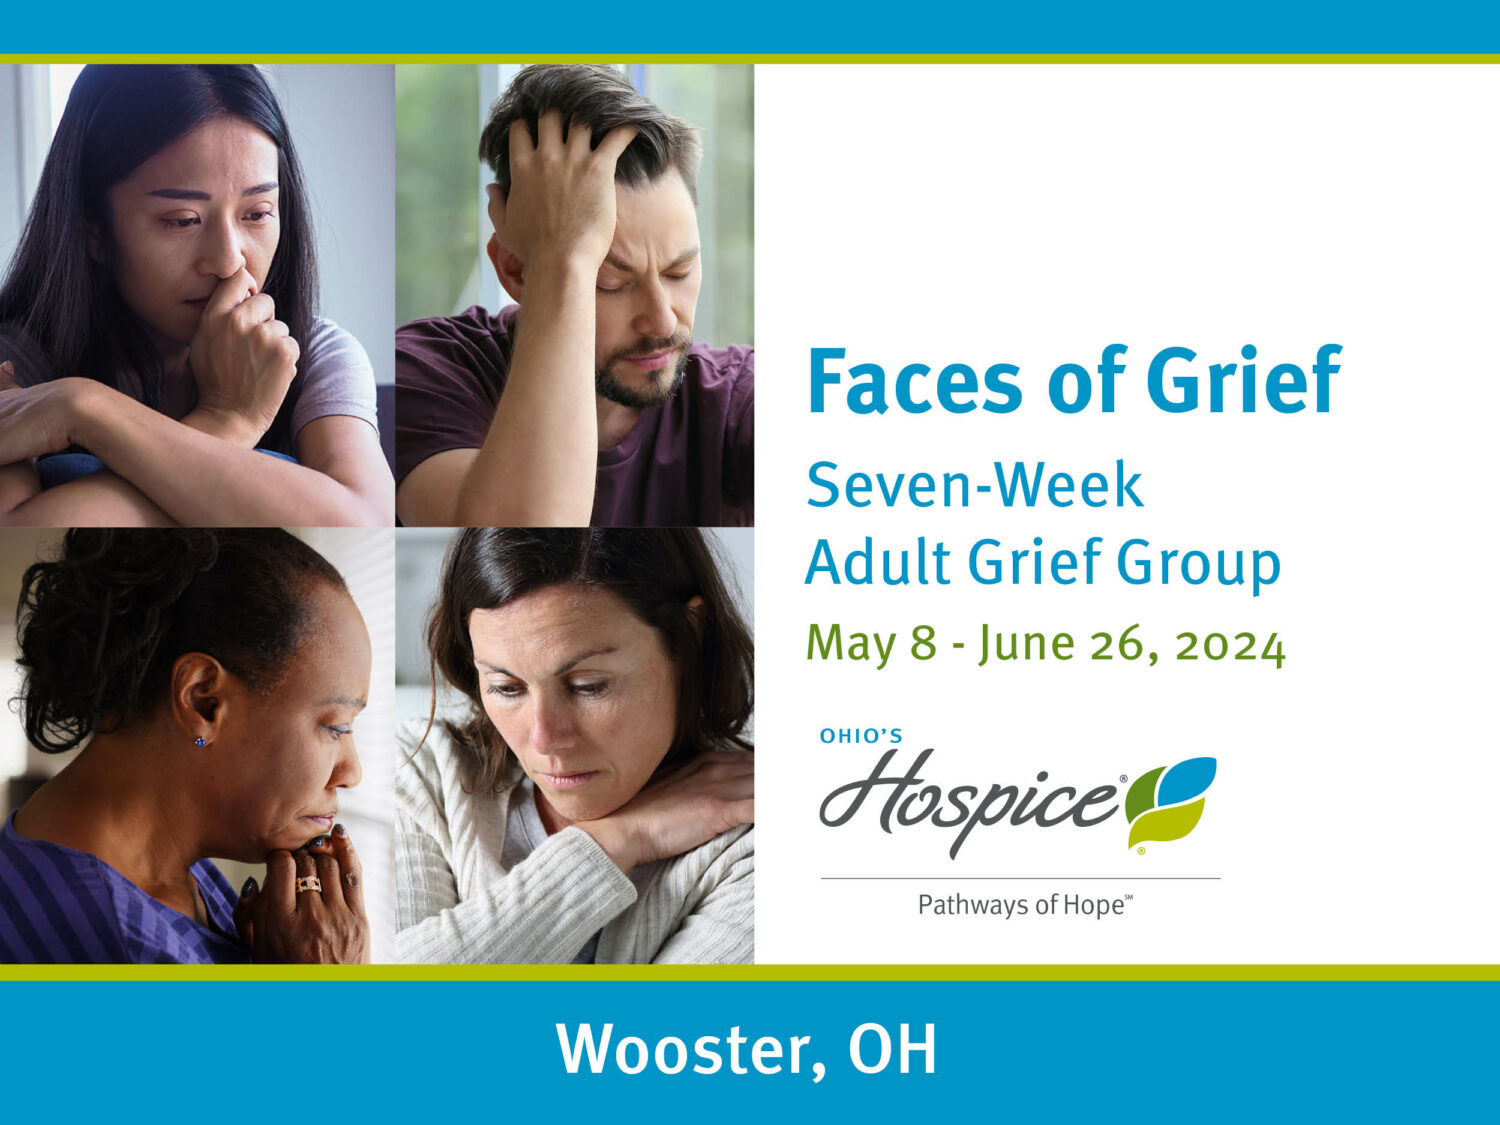 Faces of Grief Seven-Week Adult Grief Group May 8 - June 26, 2024